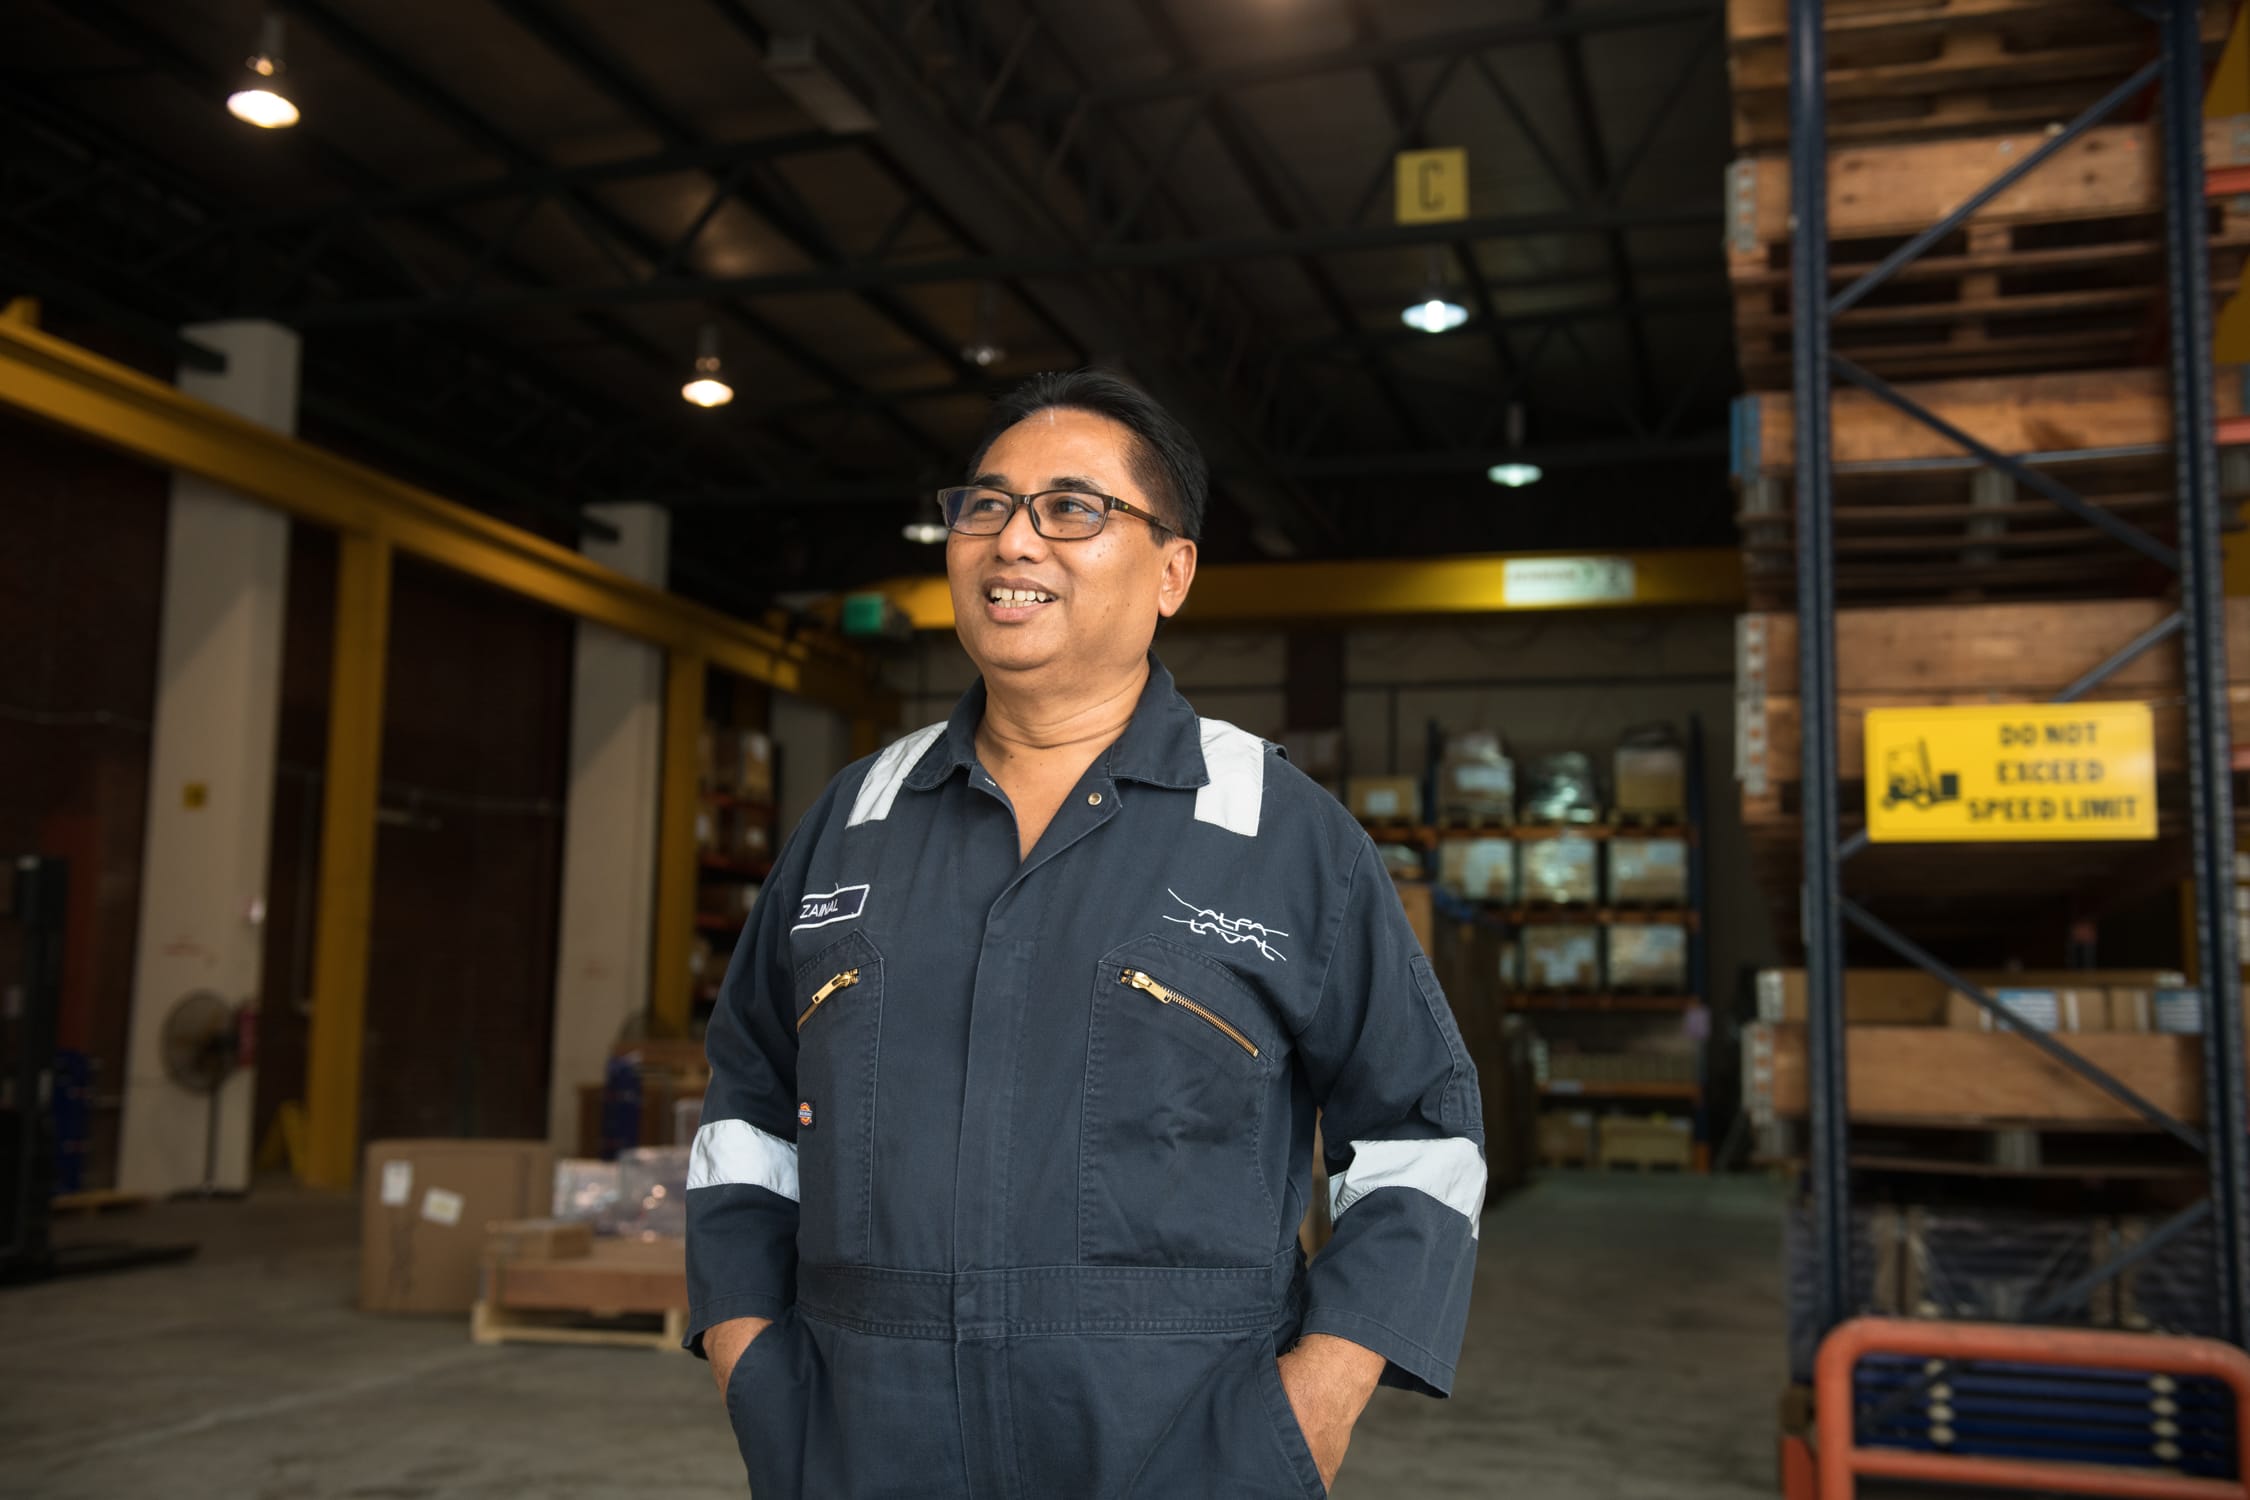 A man in a blue jumpsuit smiling for his headshot against a warehouse setting